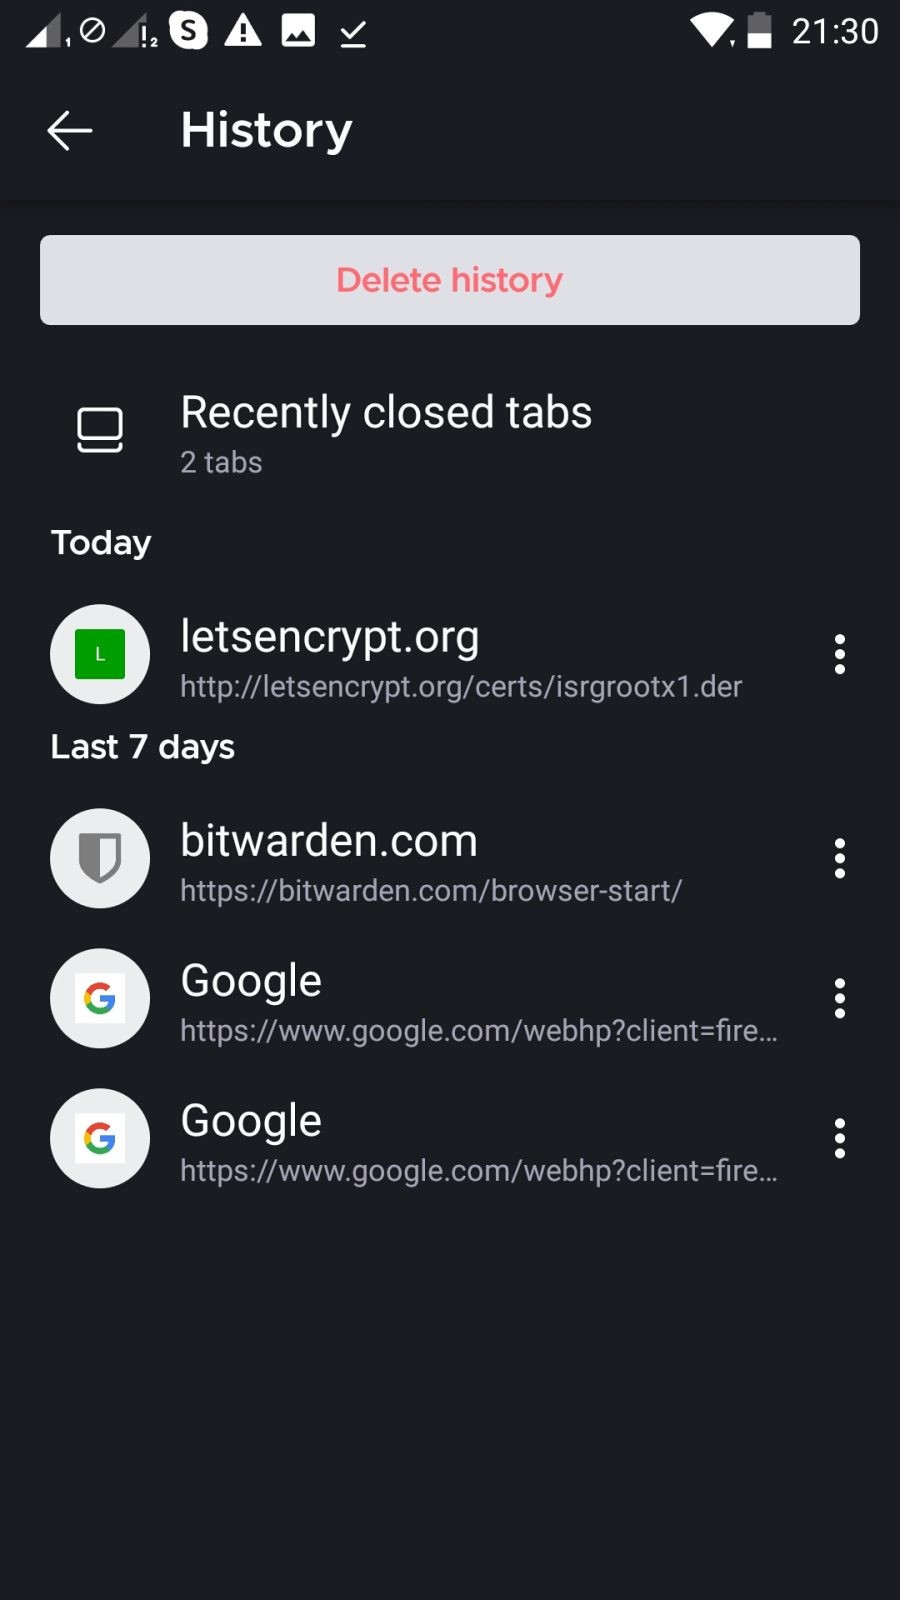 How to make older Android devices work with Letsencrypt ROOT certificate 21